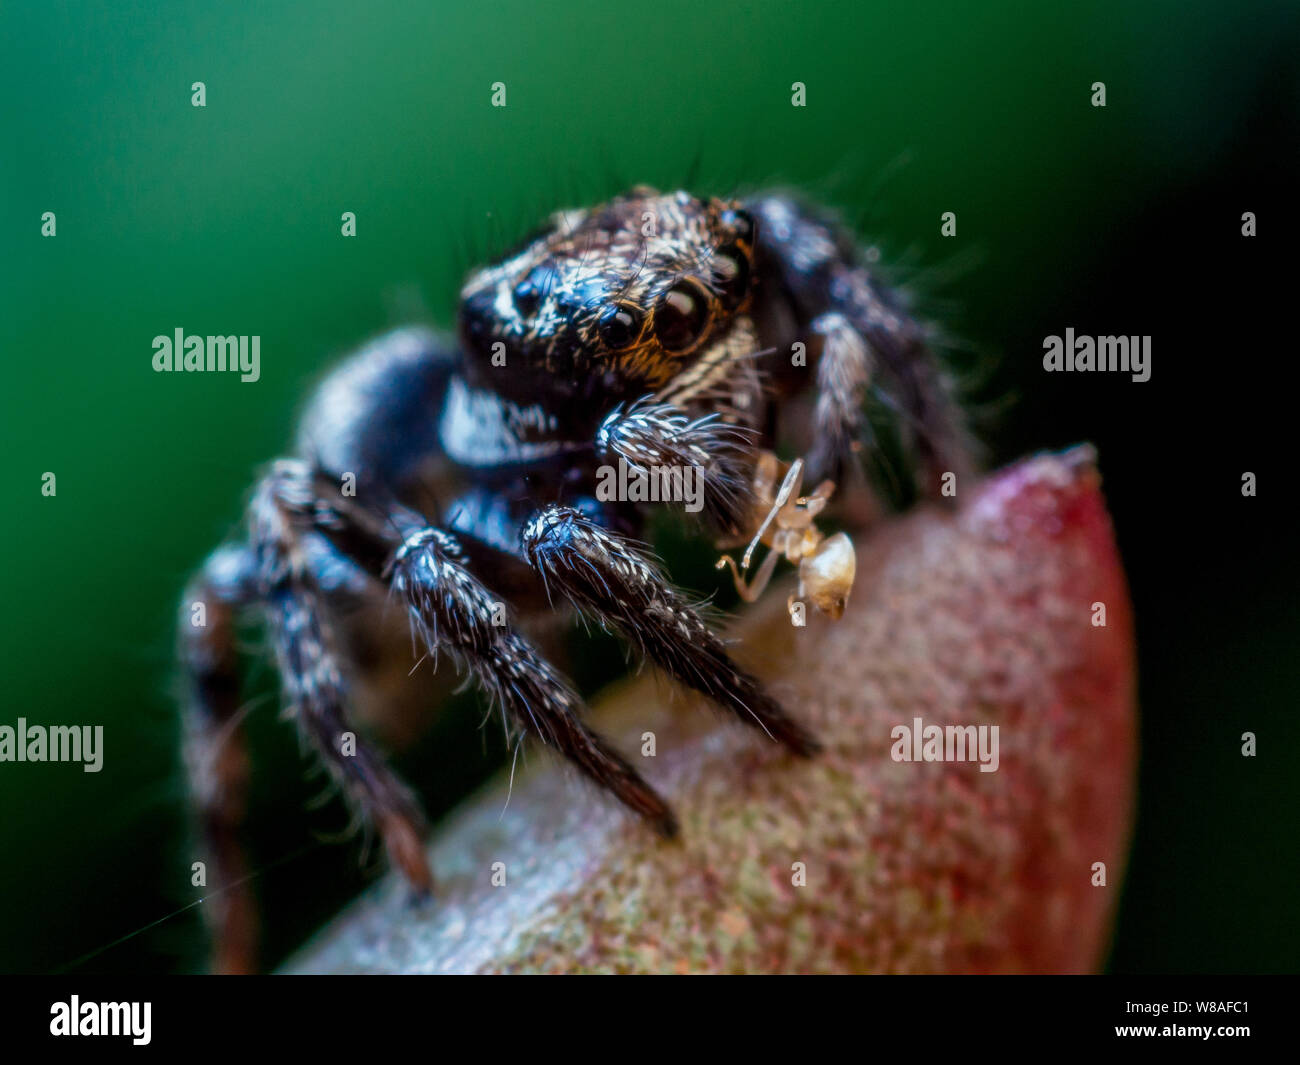 Jumping spider feeding on an ant, close-up with eye details visible Stock Photo